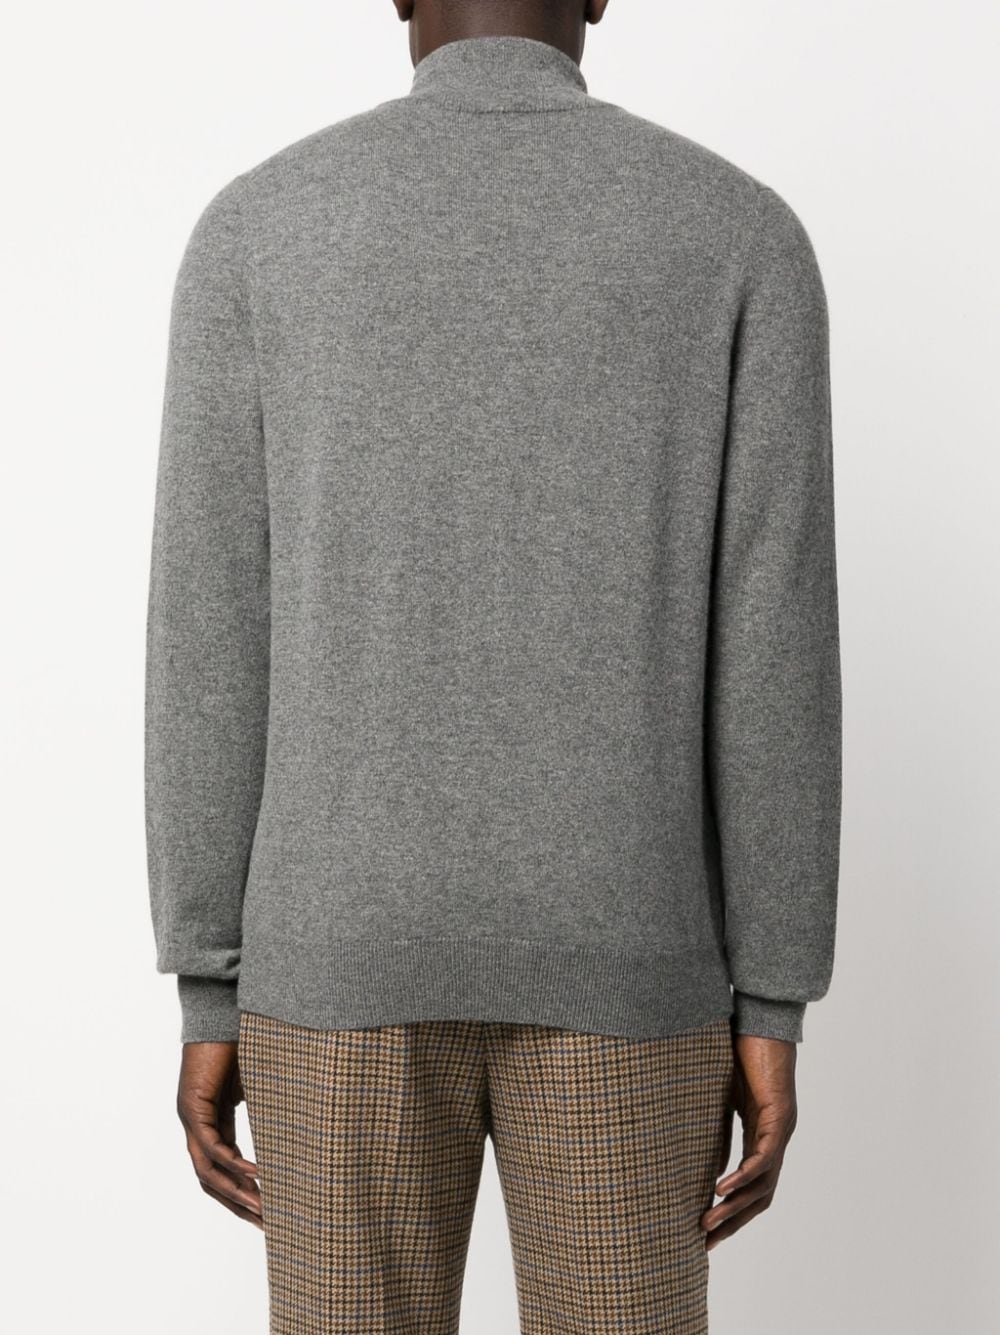 PAUL SMITH Luxurious Cashmere Zip-Up Cardigan for Men